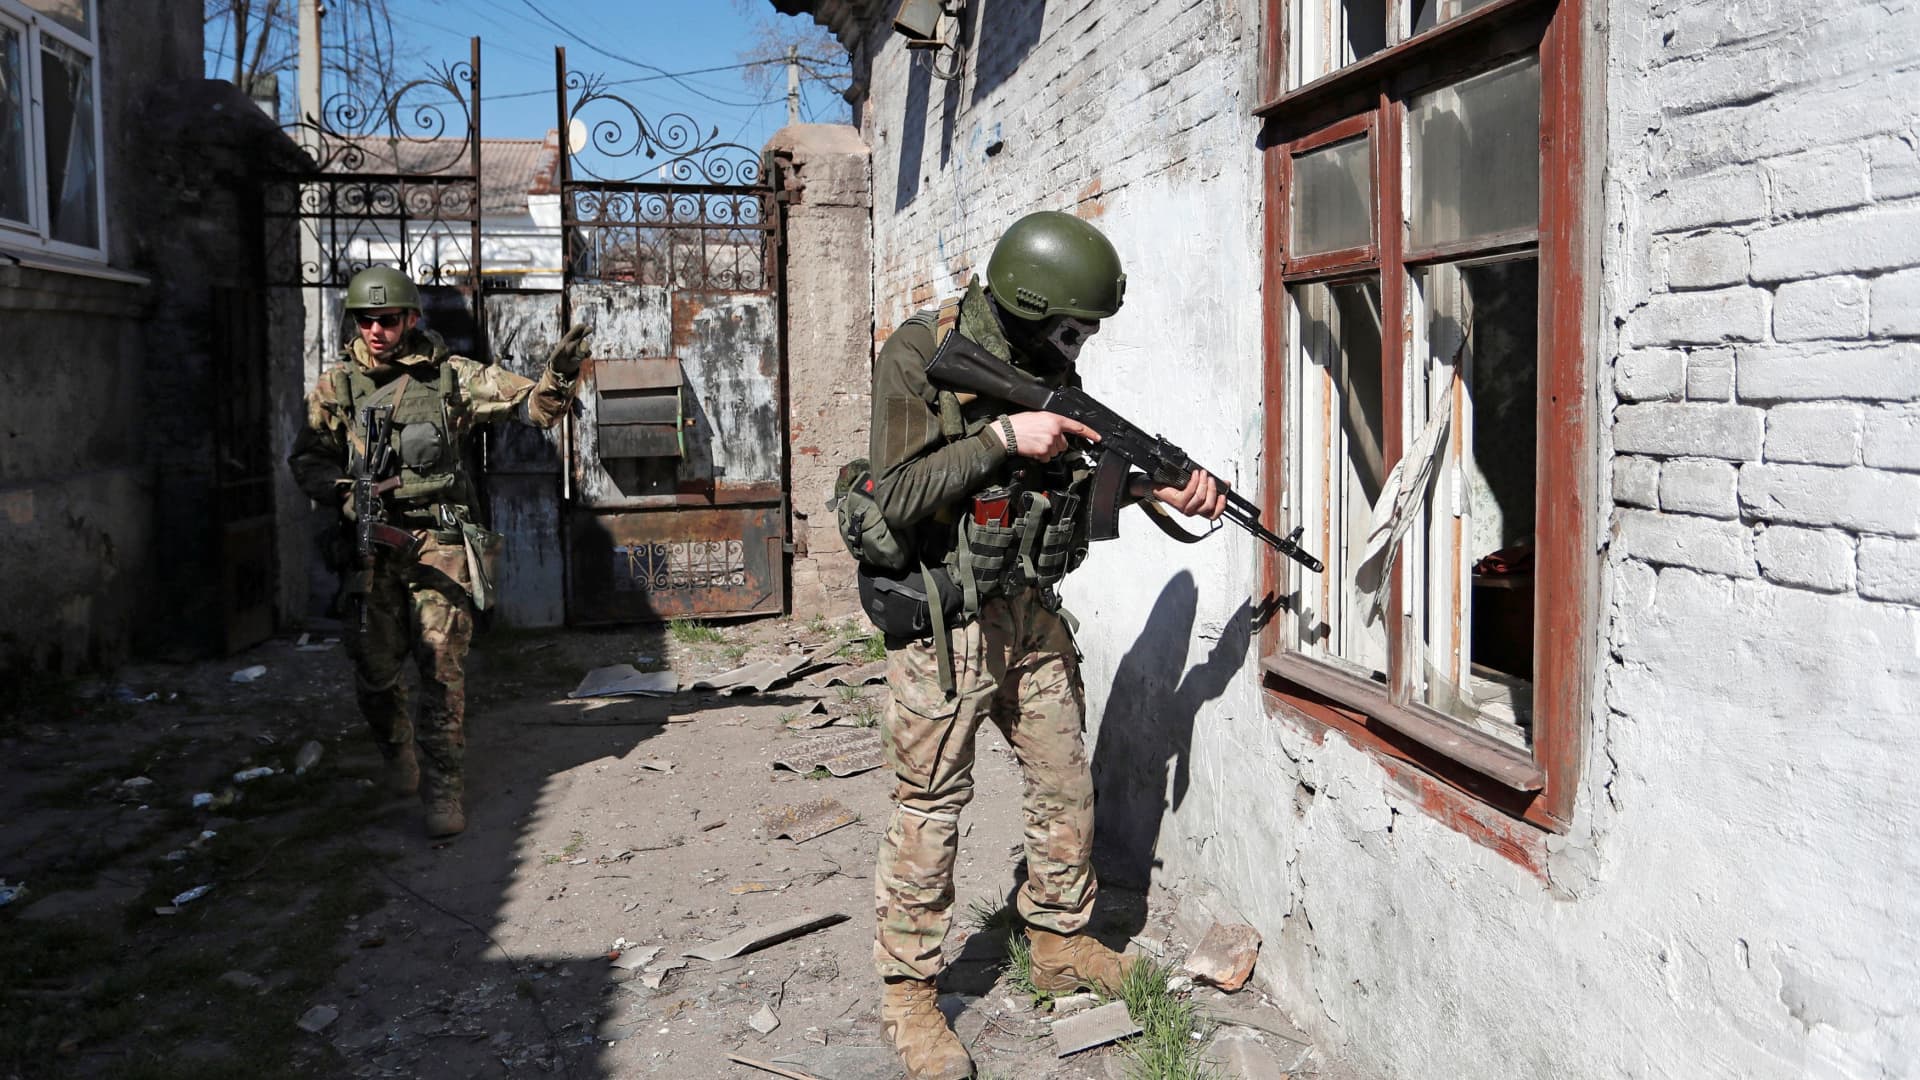 Service members of pro-Russian troops carry out a search of a house during Ukraine-Russia conflict in the southern port city of Mariupol, Ukraine April 7, 2022.